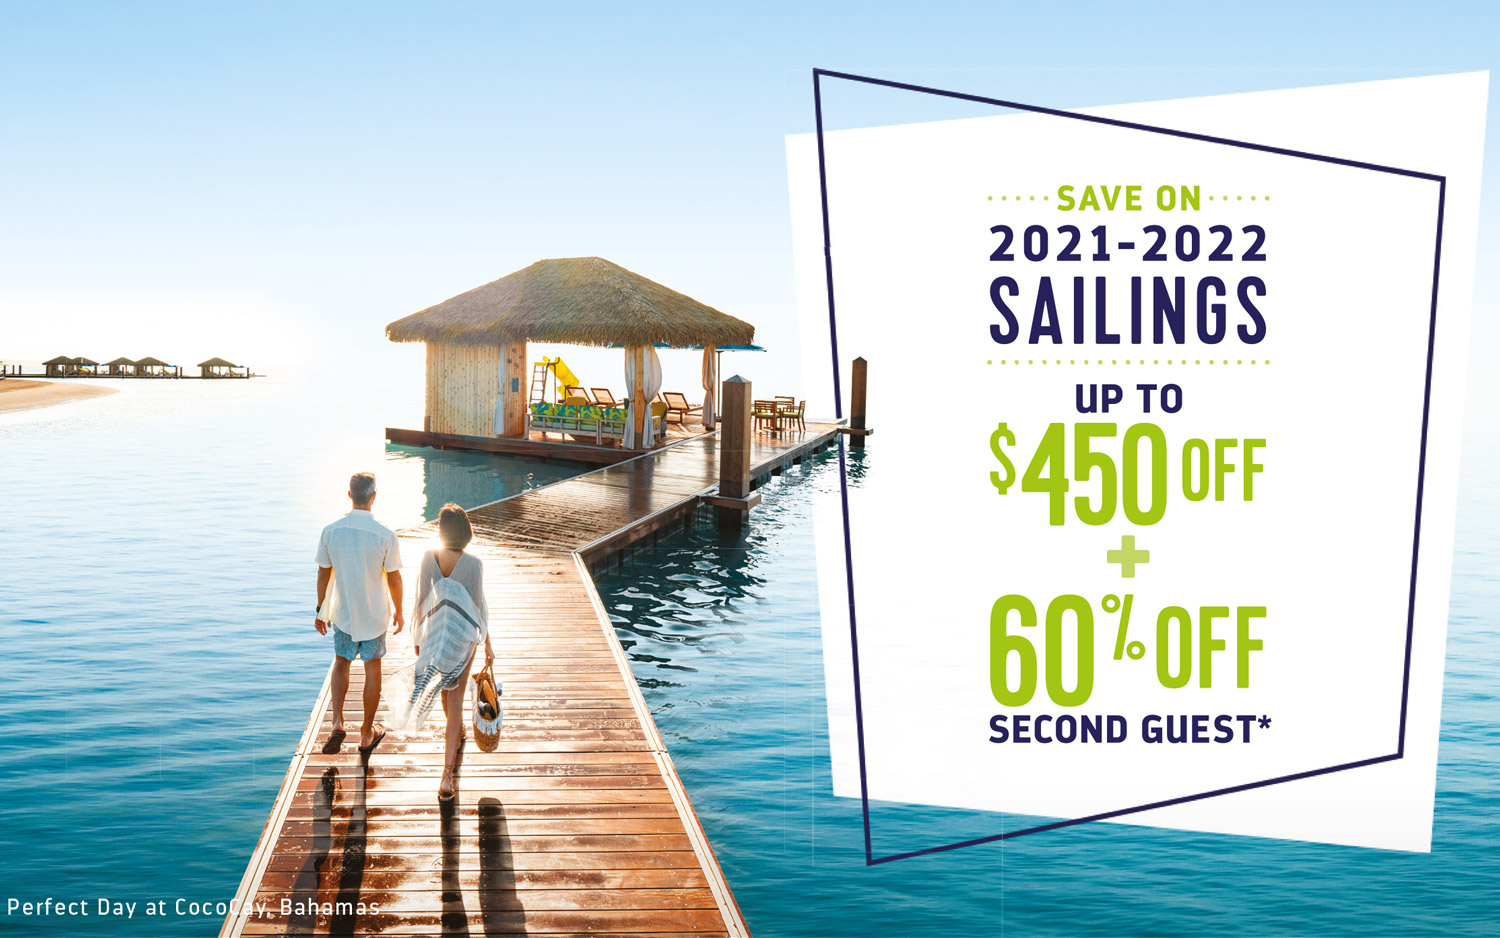 Up to $450 Off + 60 Off Second Guest* with Royal Caribbean